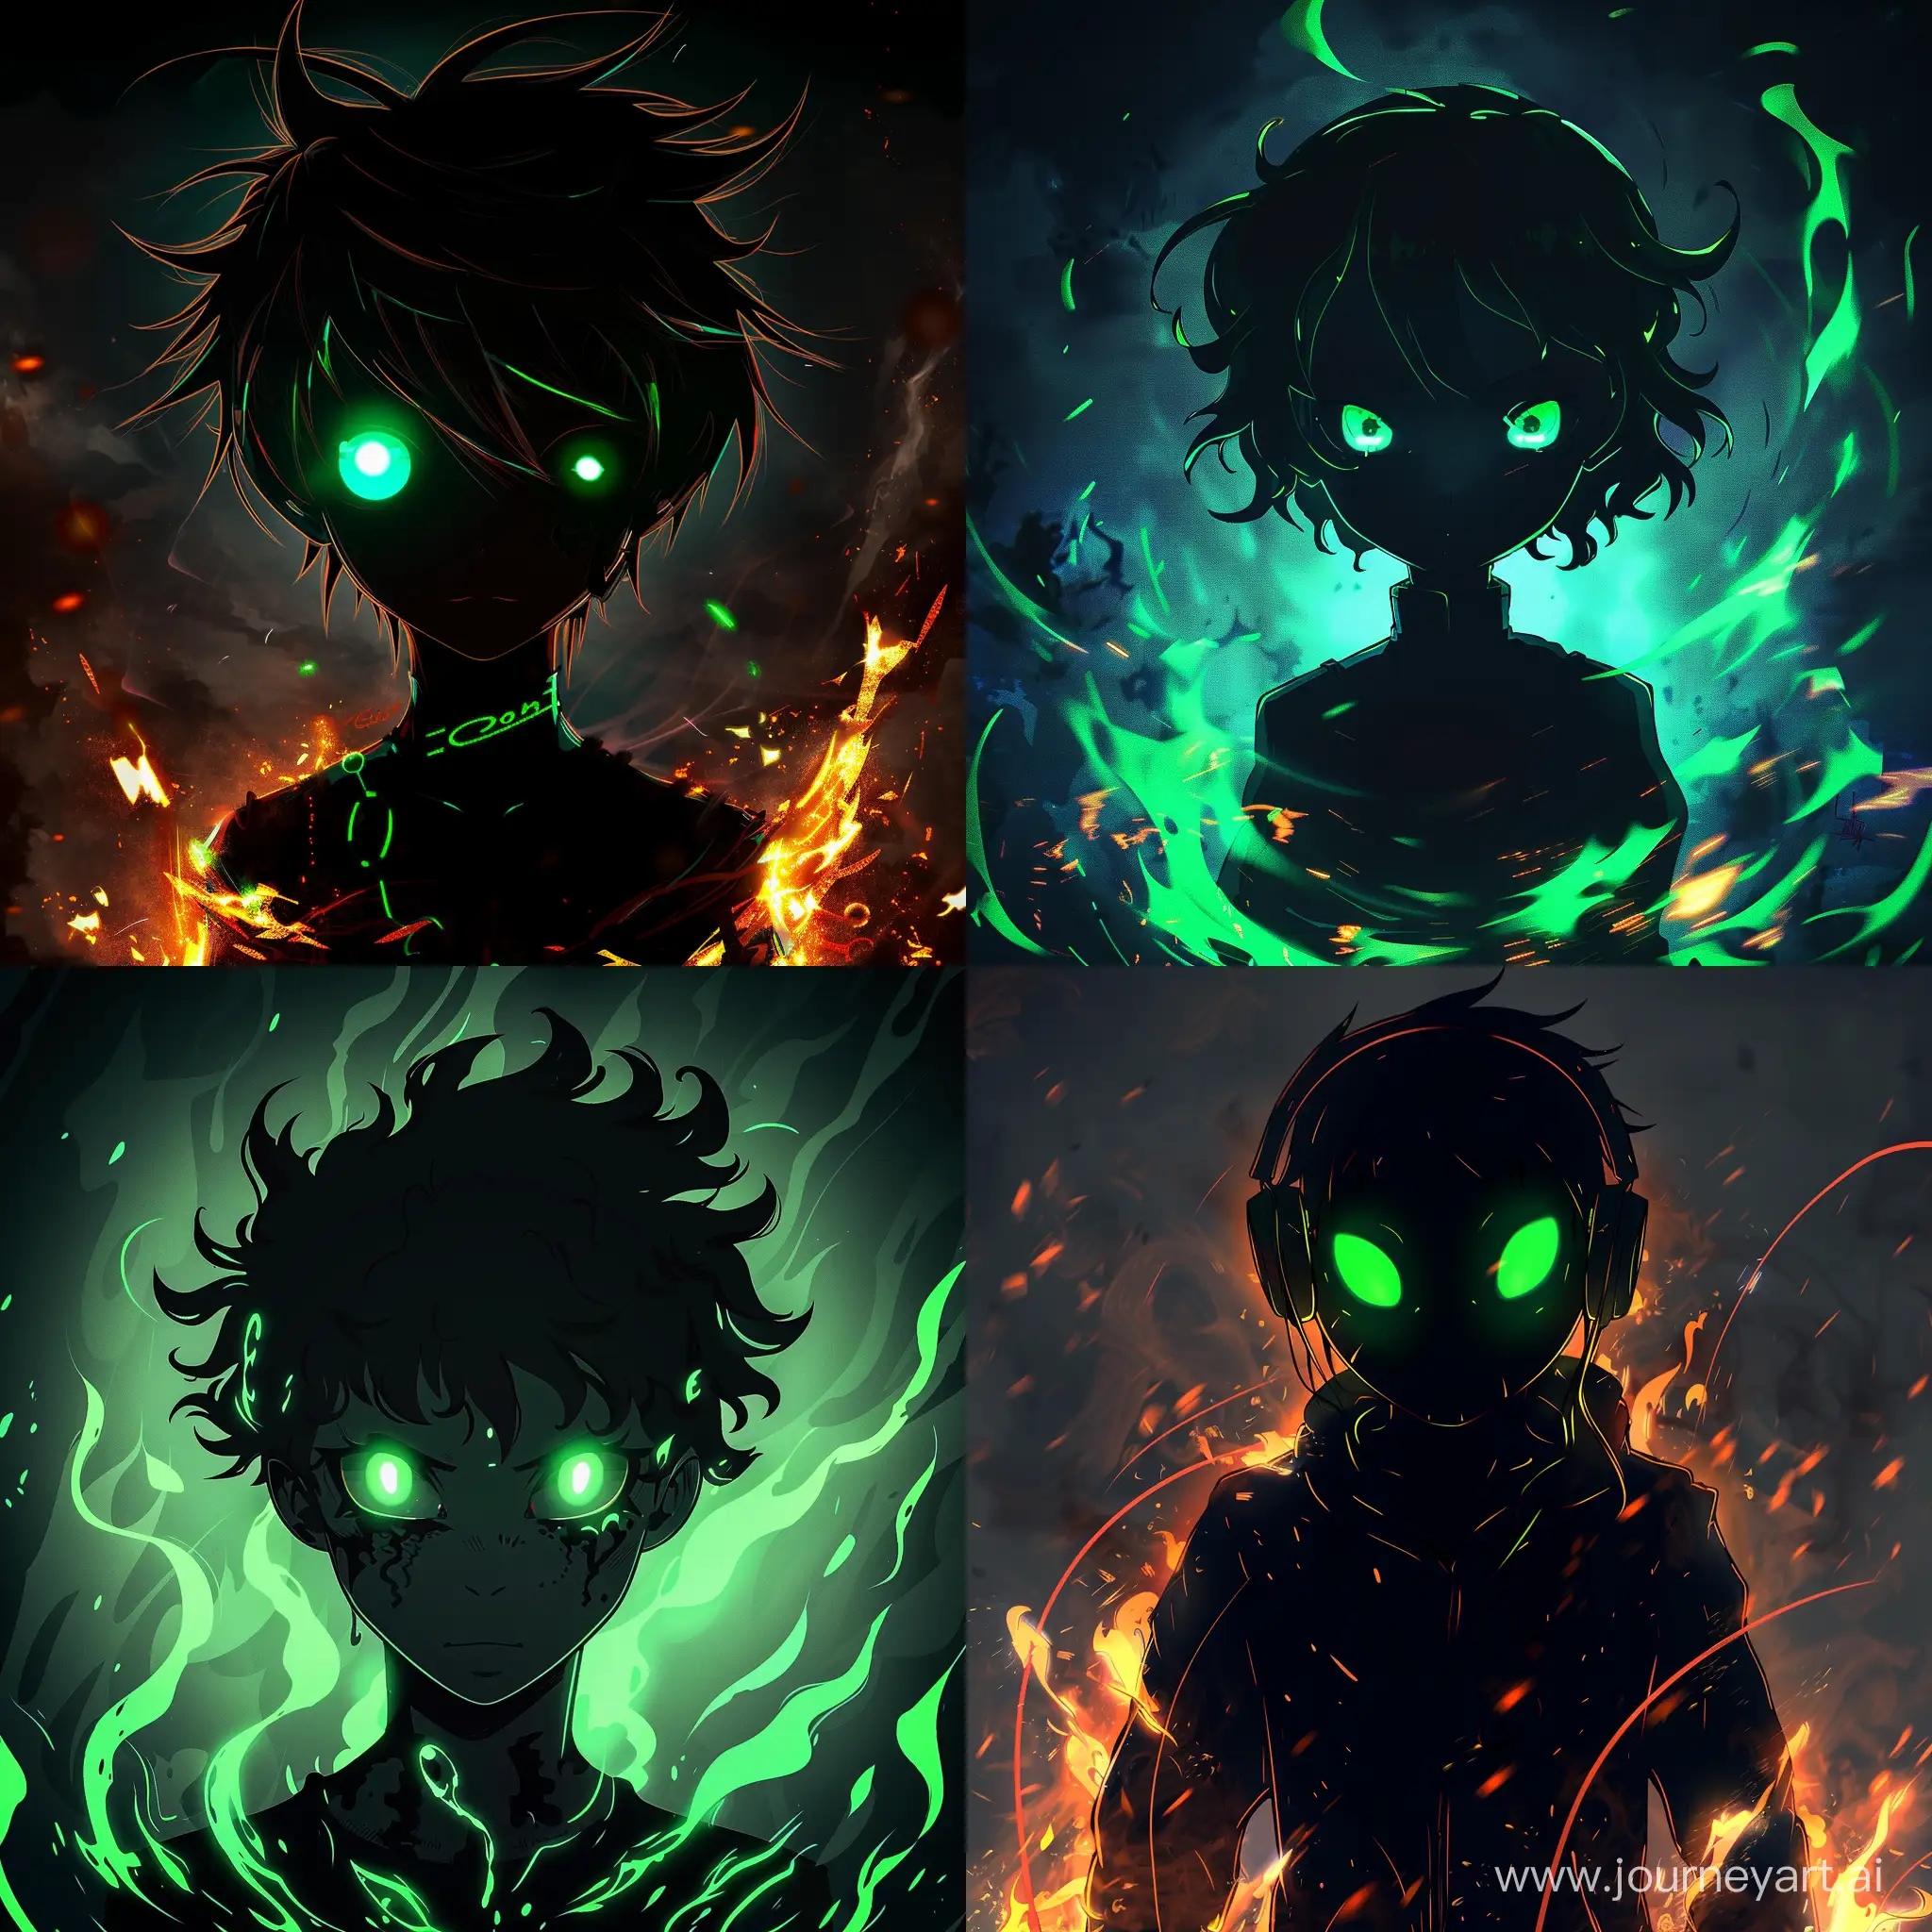 Mysterious-Anime-Character-with-Glowing-Green-Eyes-Surrounded-by-Flames